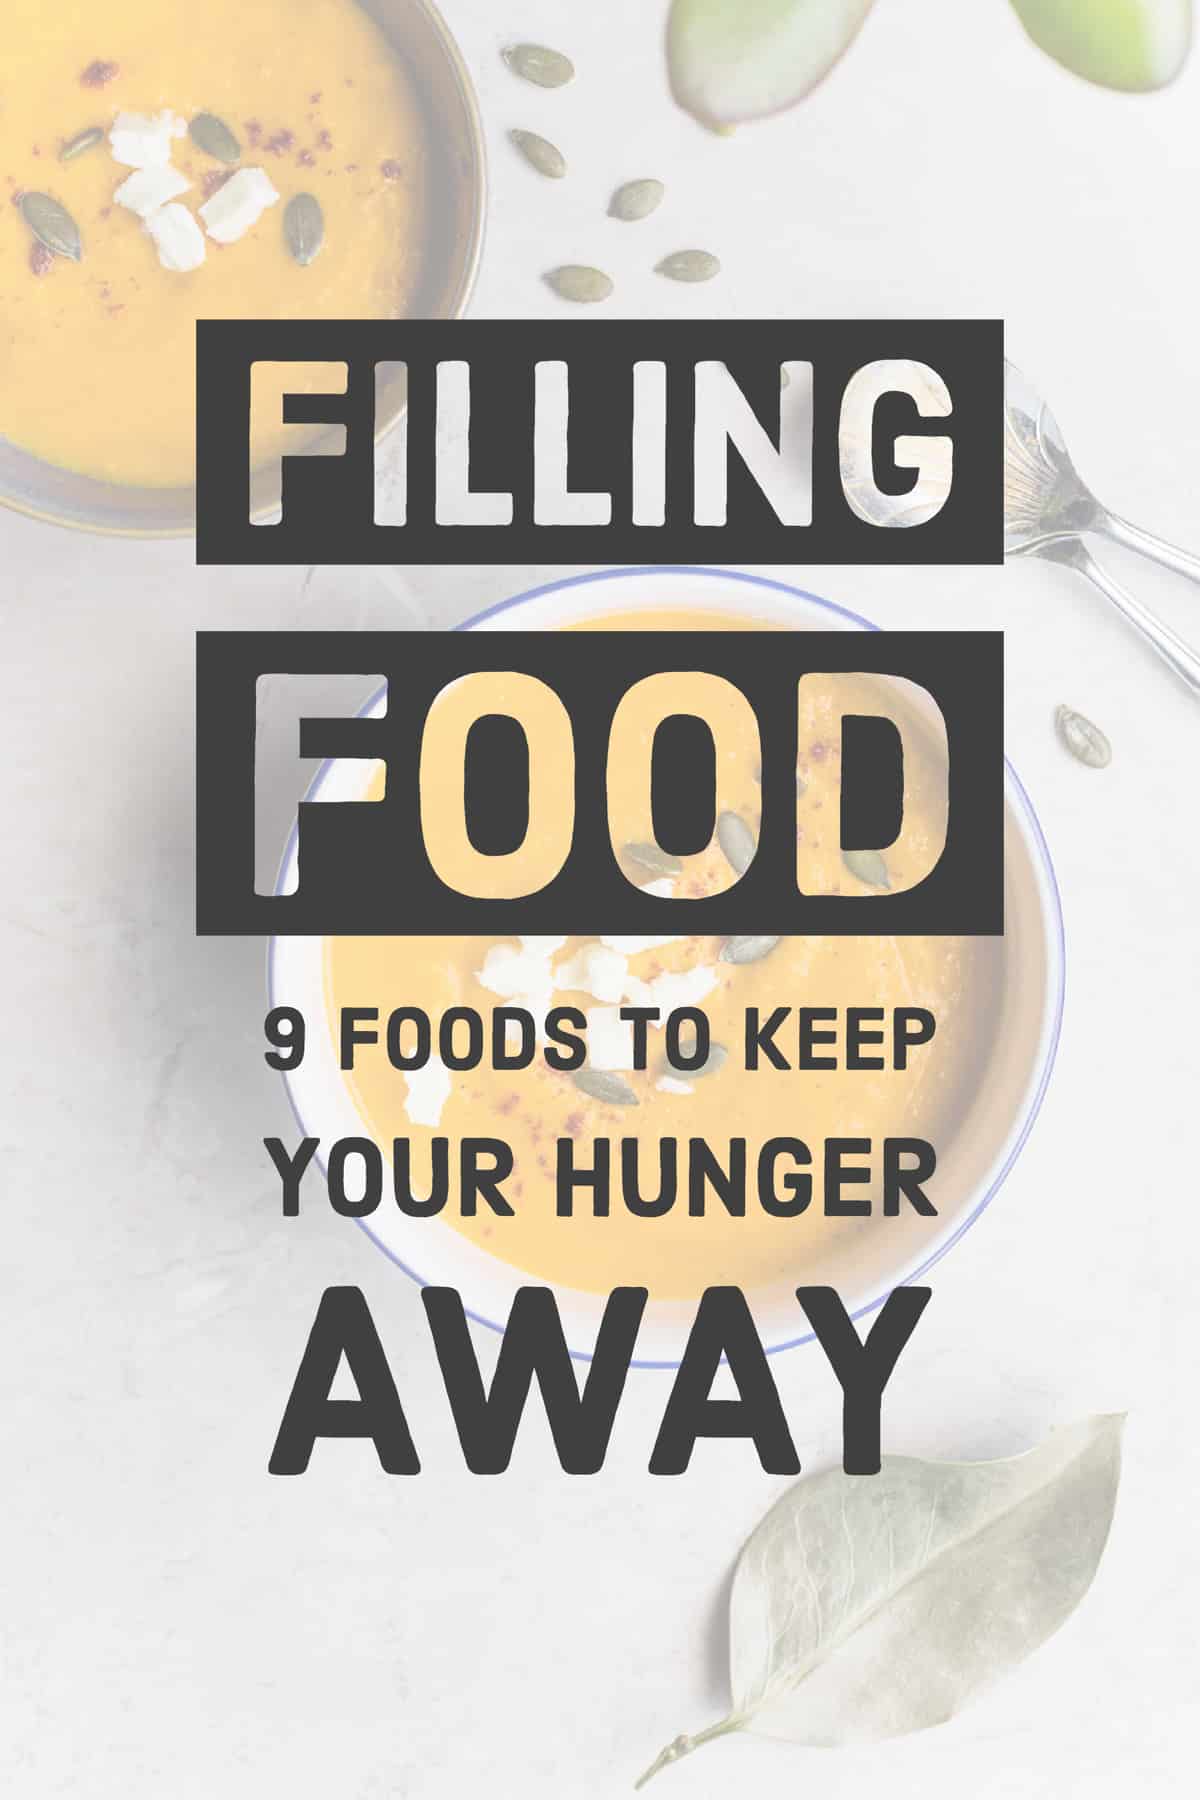 filling food 9 foods to keep your hunger away